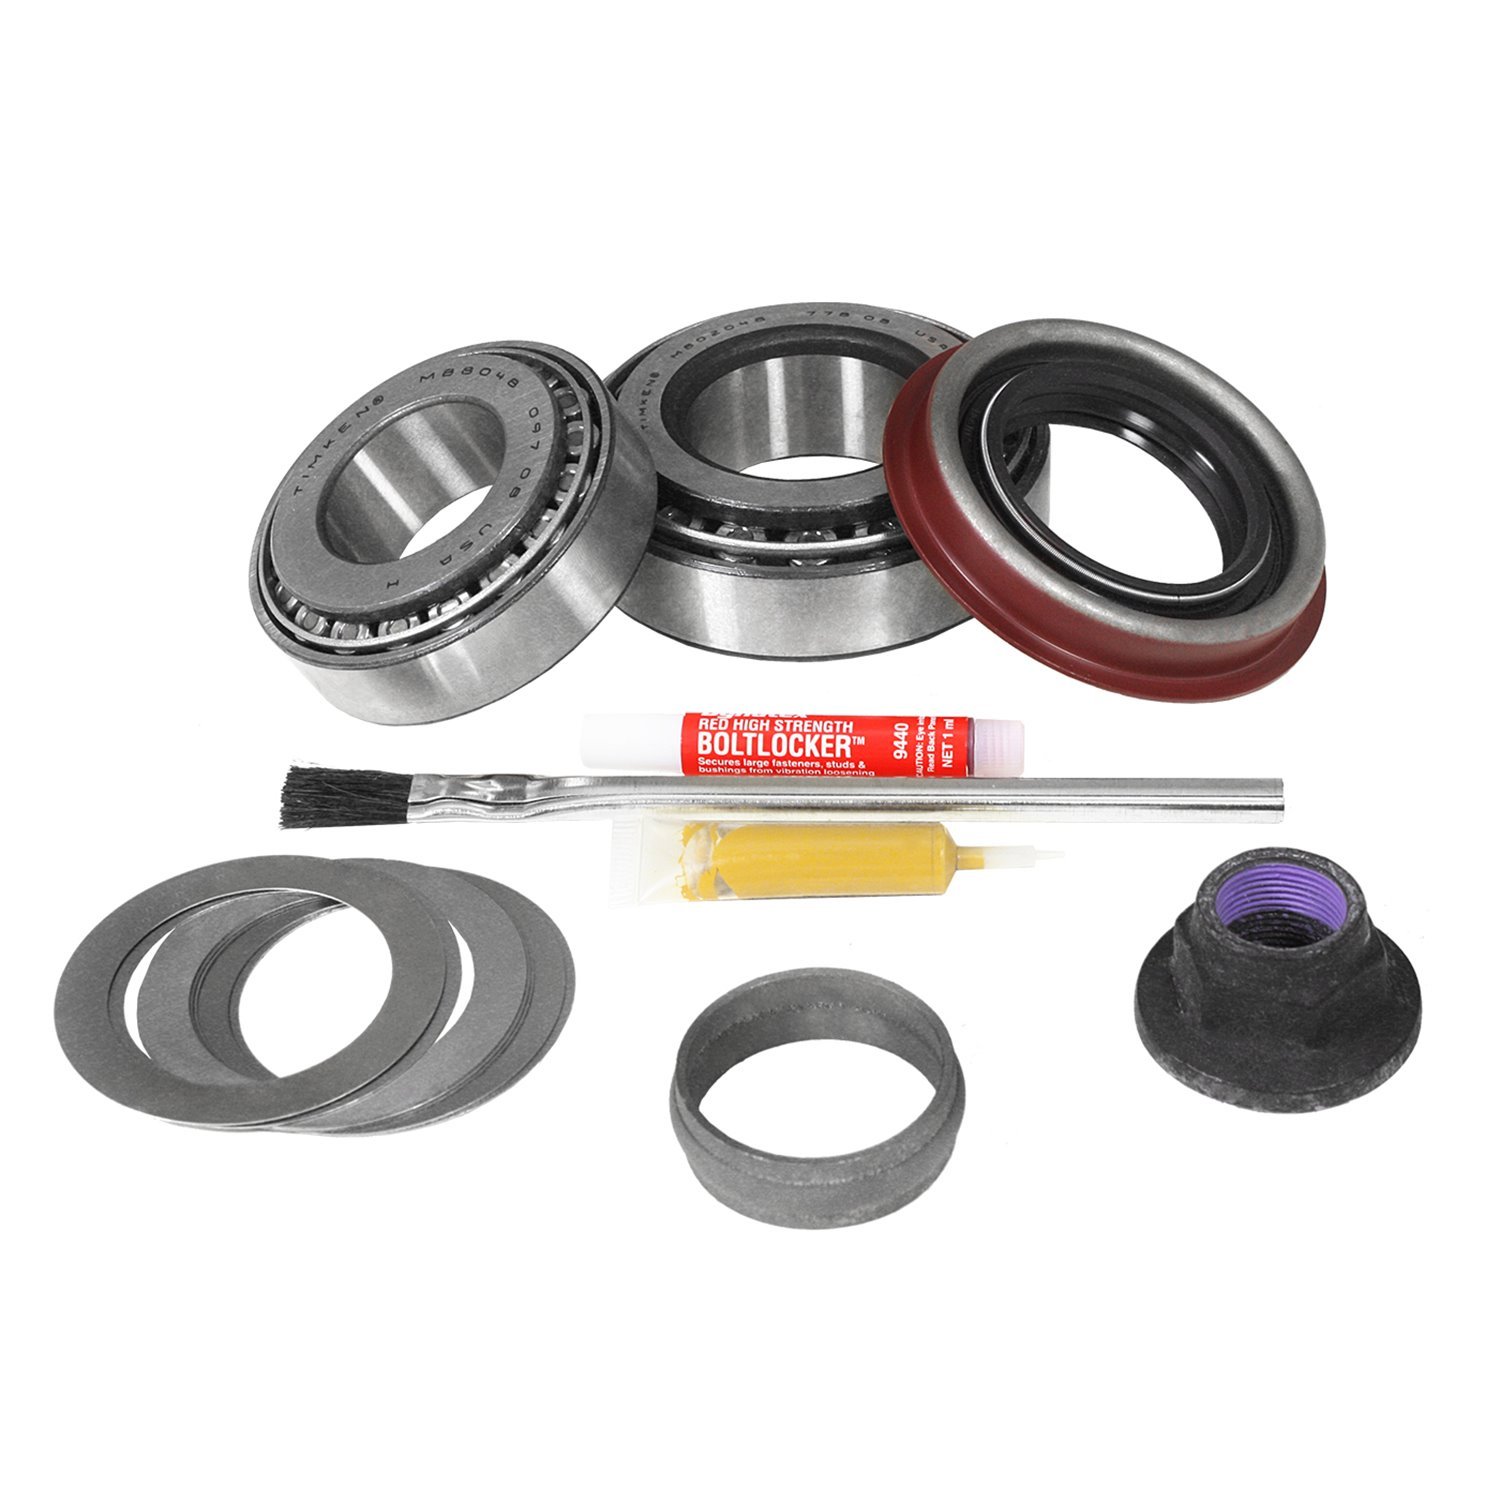 Pinion Install Kit For '08-'10 Ford 9.75 in. Diff W/ '11 & Up Ring & Pinion